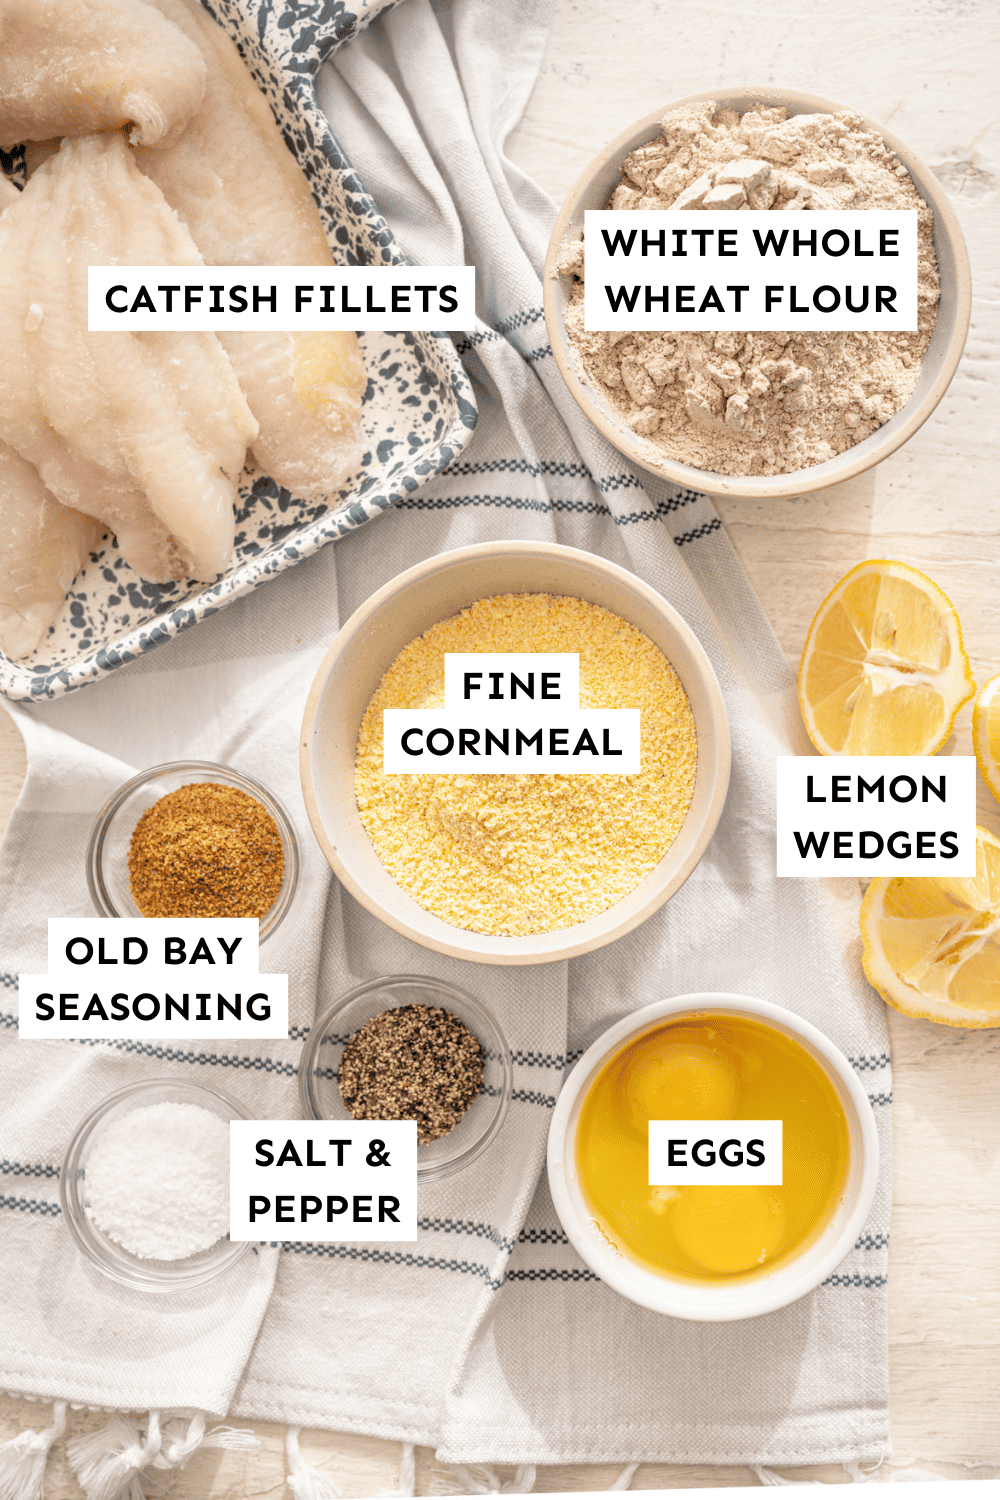 Fried catfish ingredients measured out and labeled.